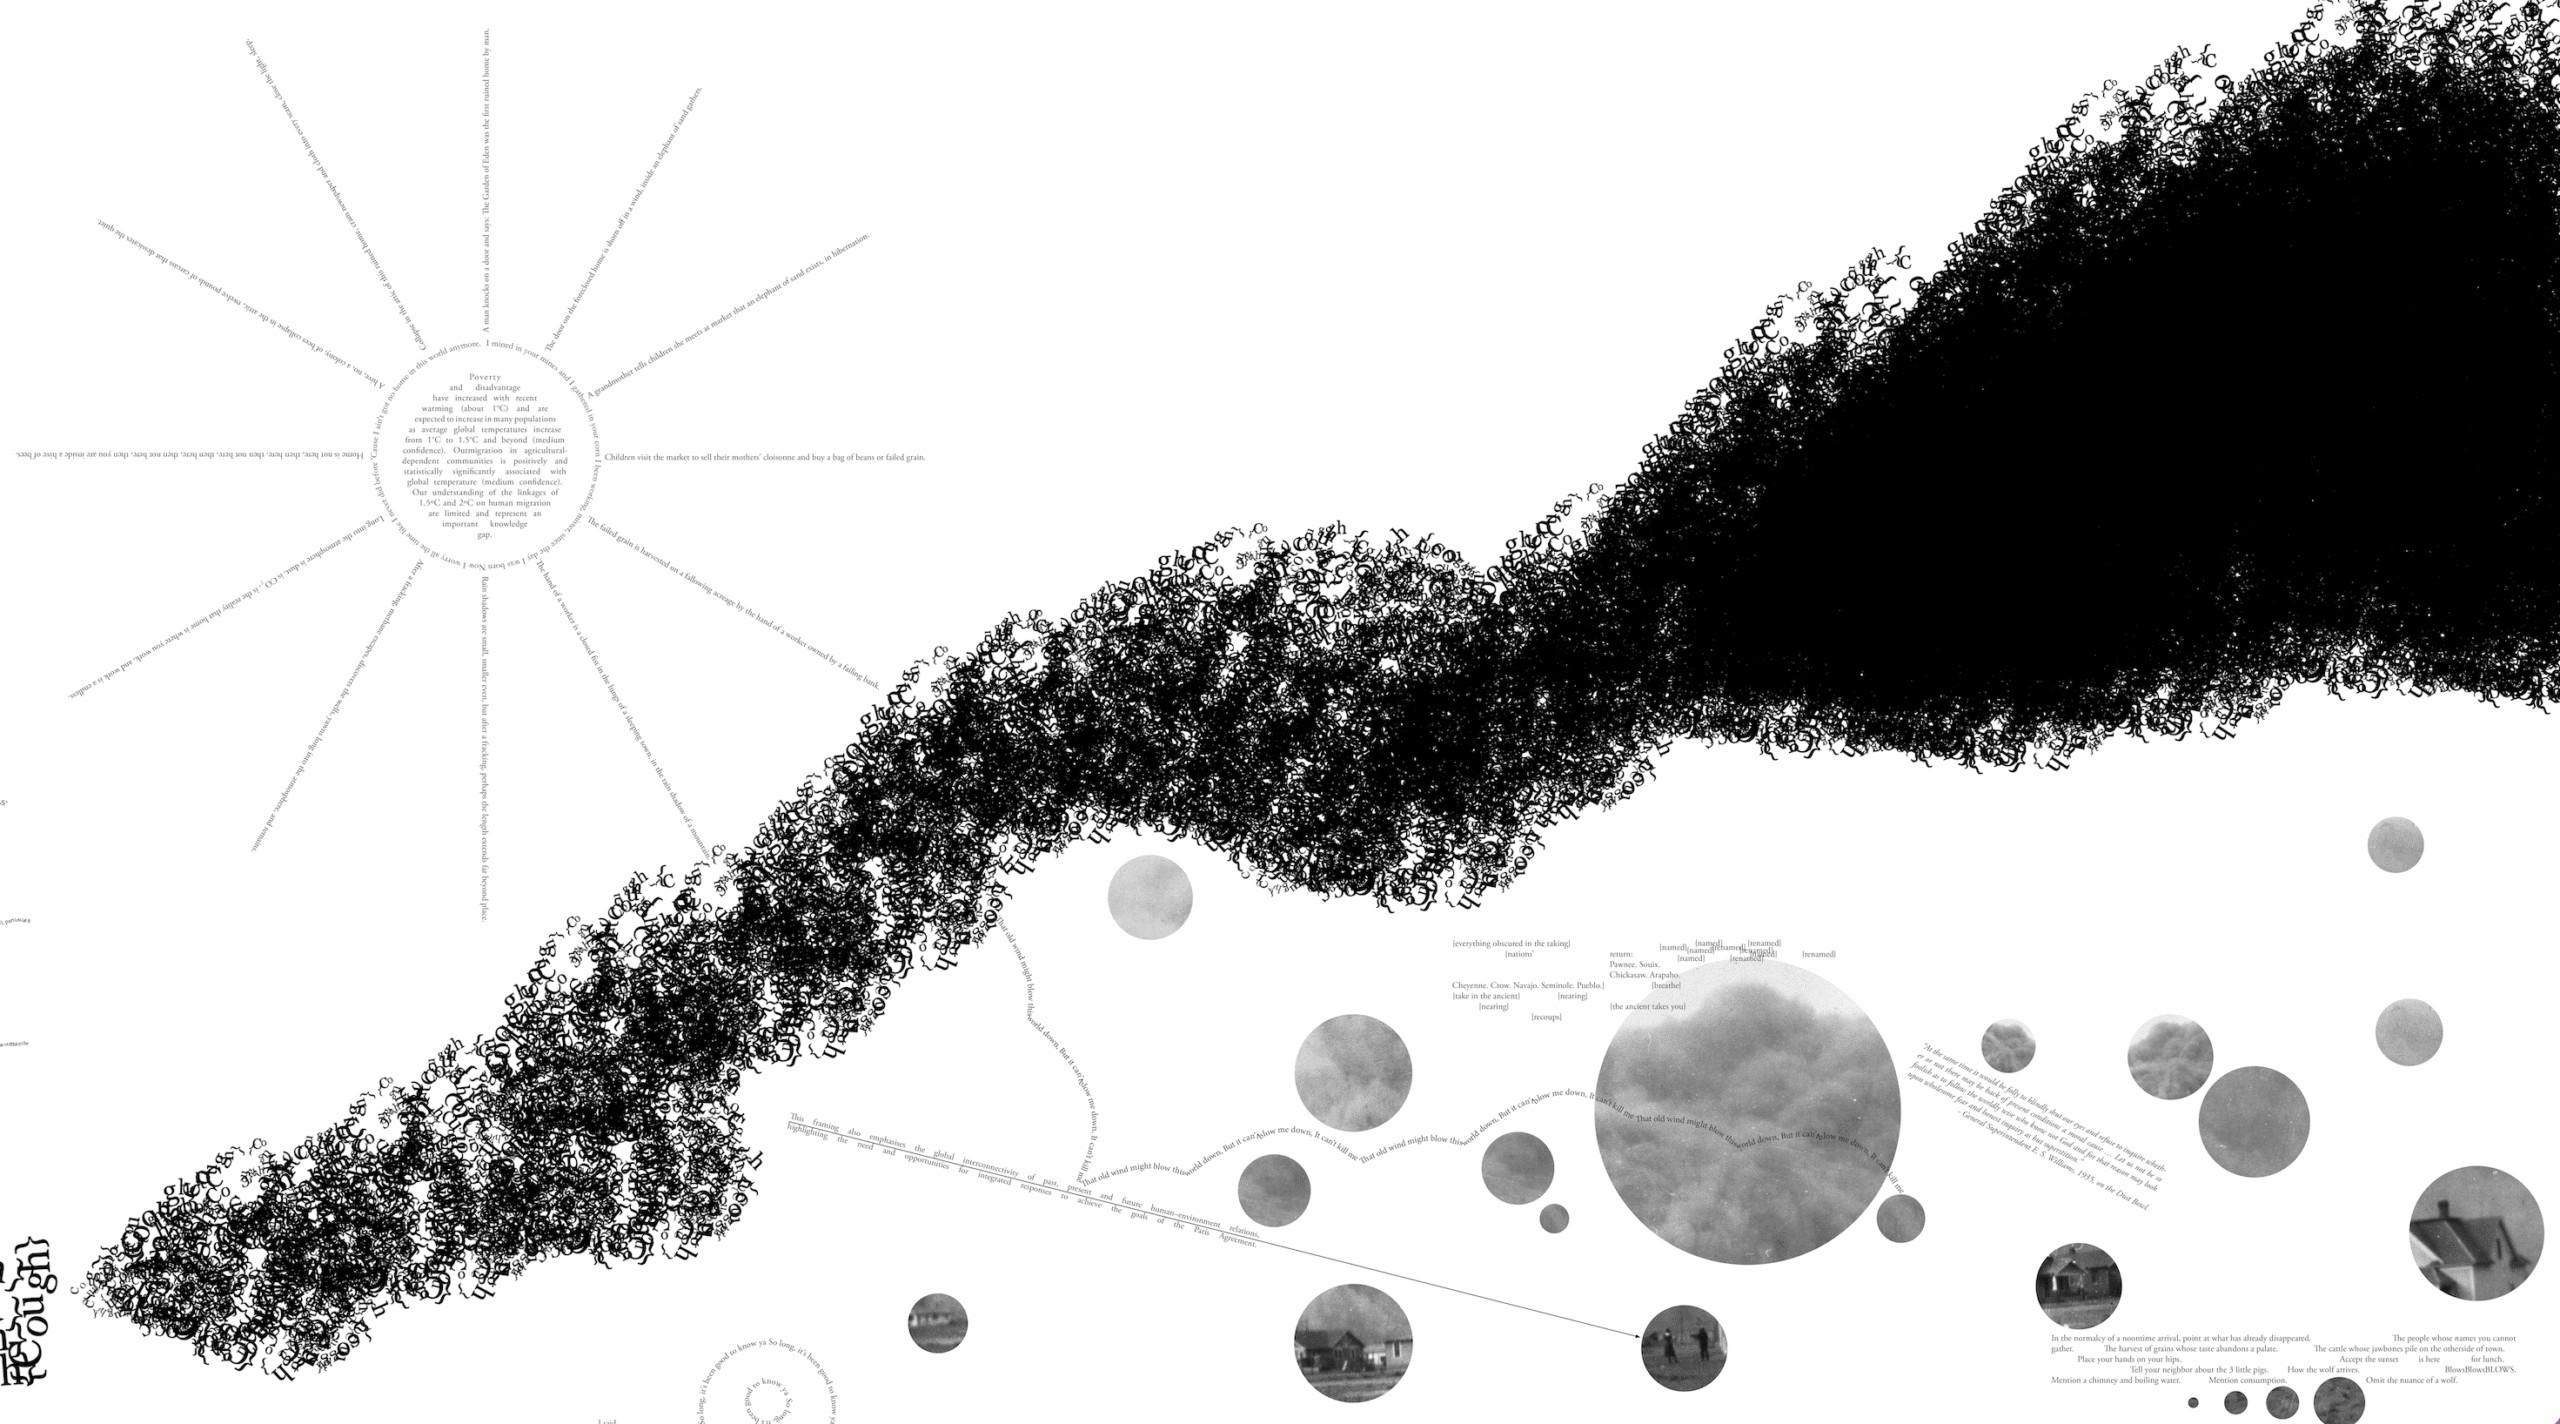 A visual poem of sentences in the shape of a sun, a dust cloud, and planets.